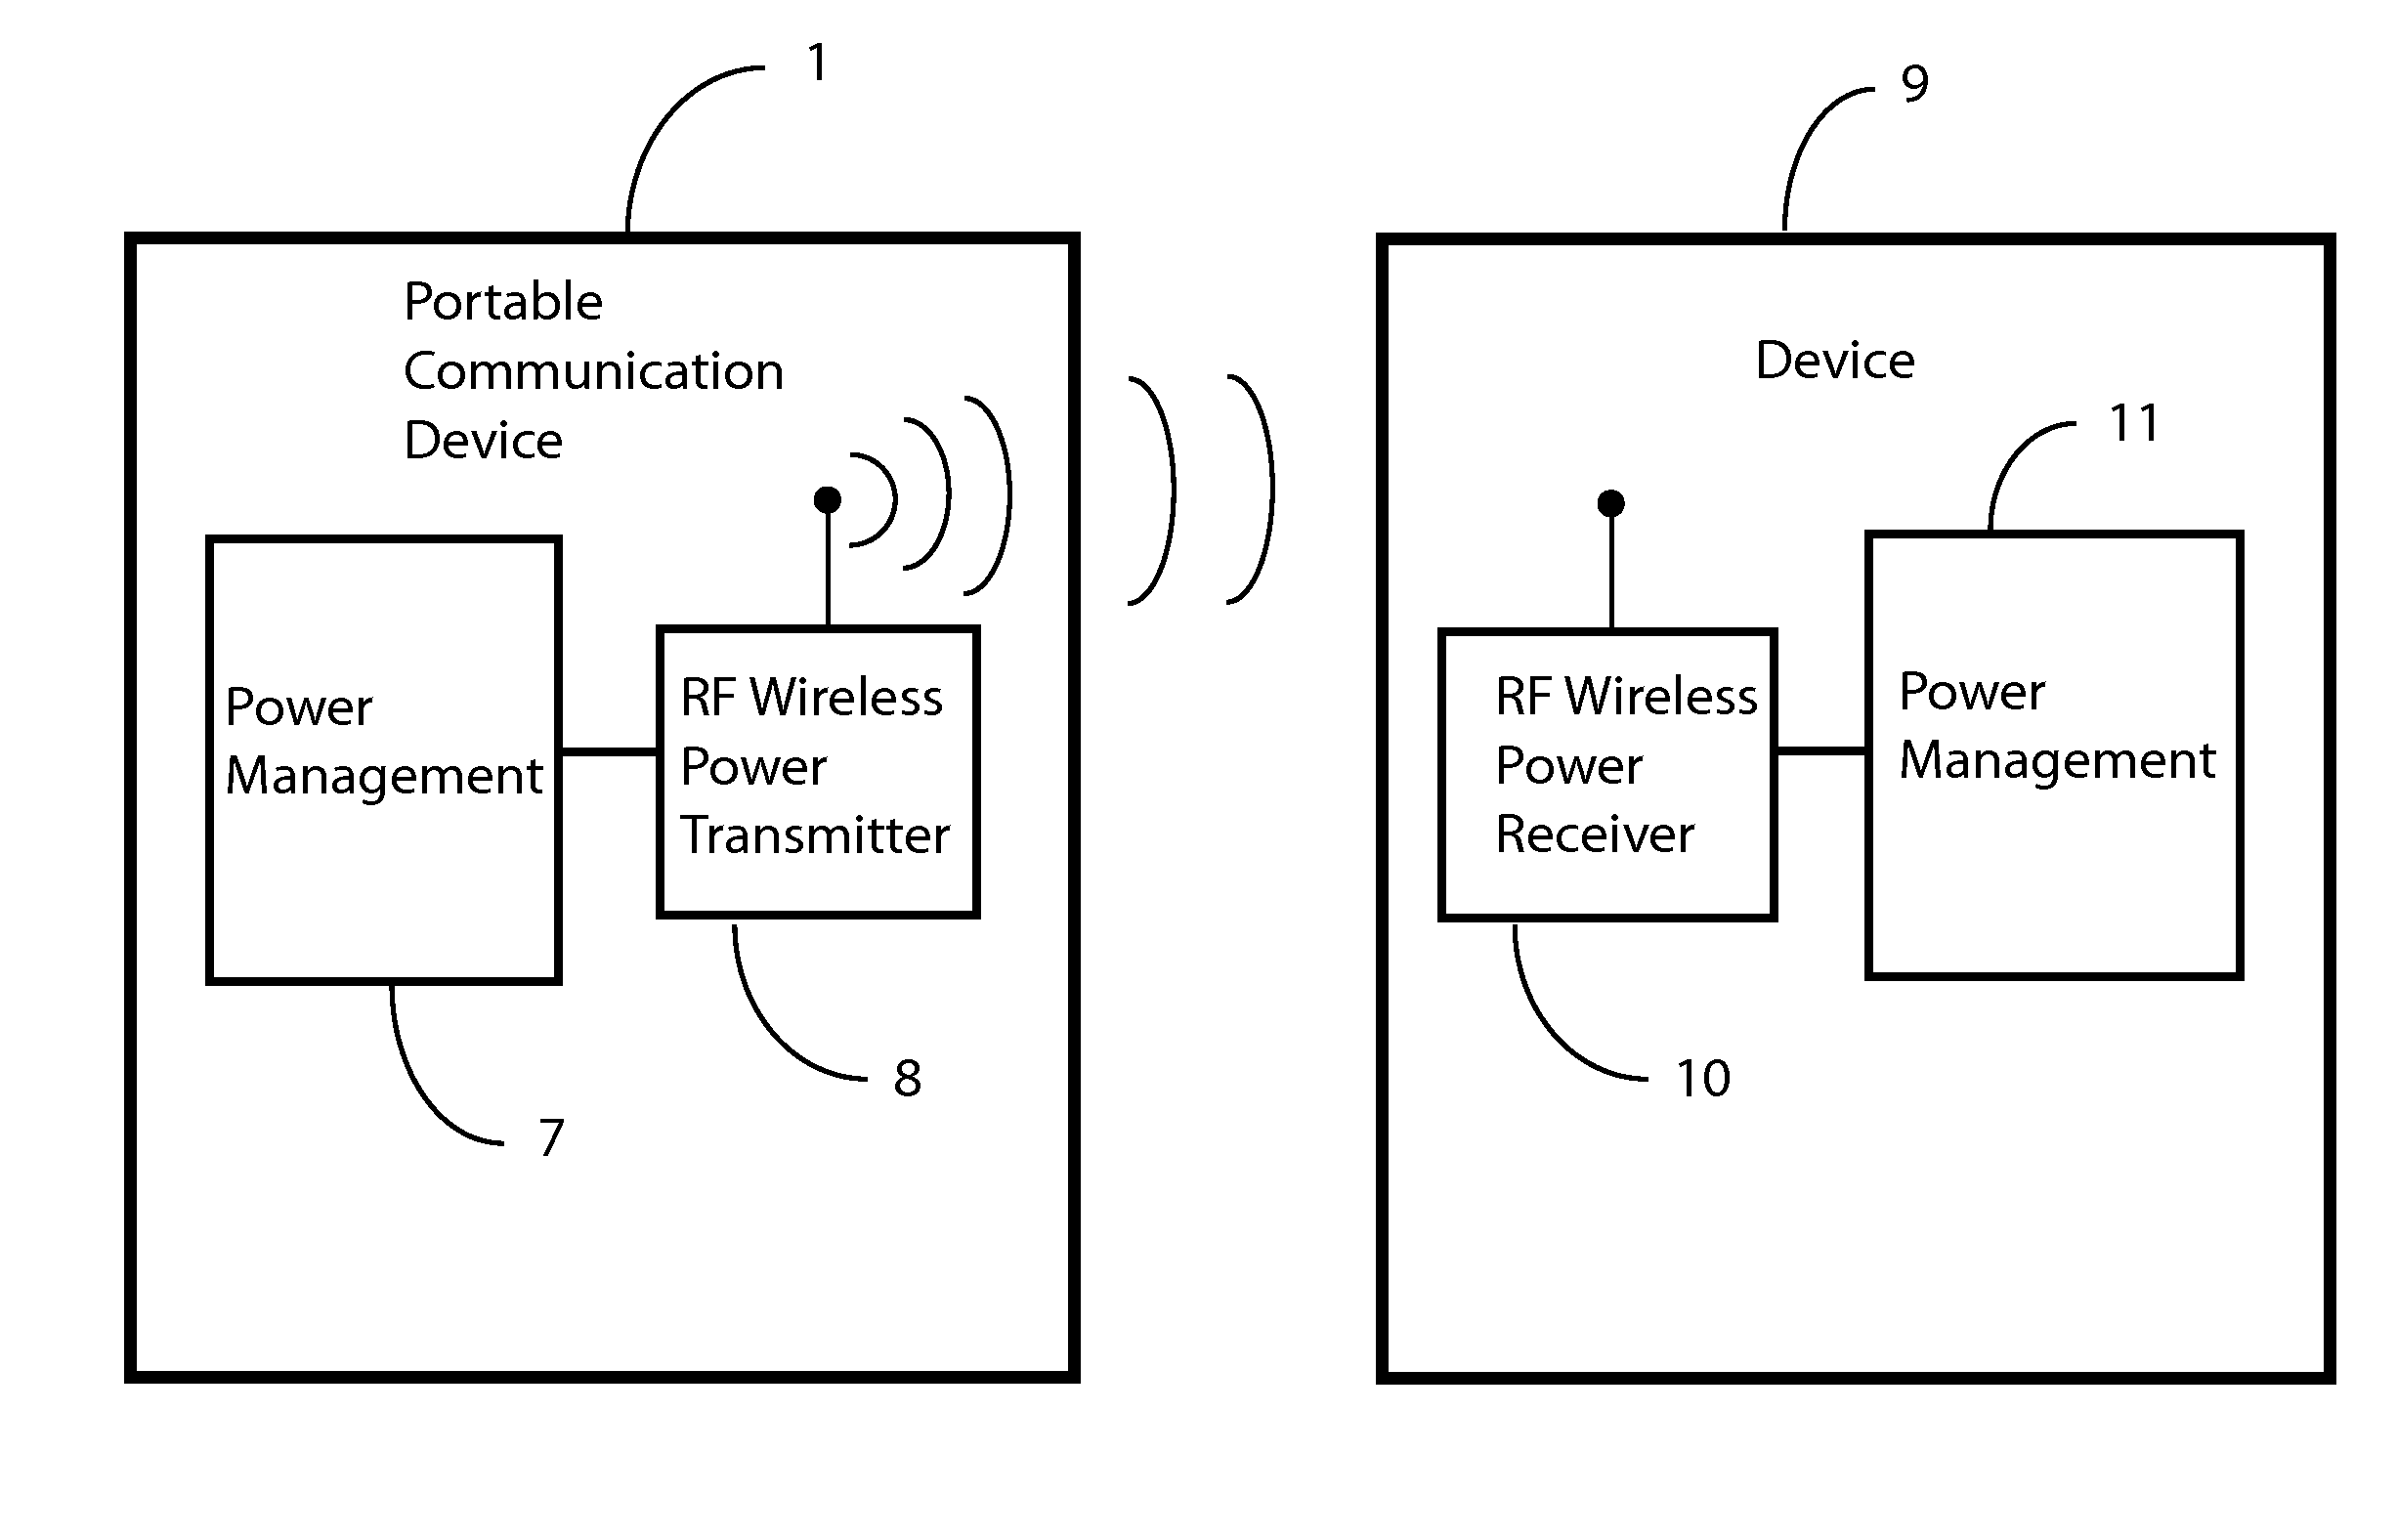 Wireless Power Transmission in Portable Communication Devices